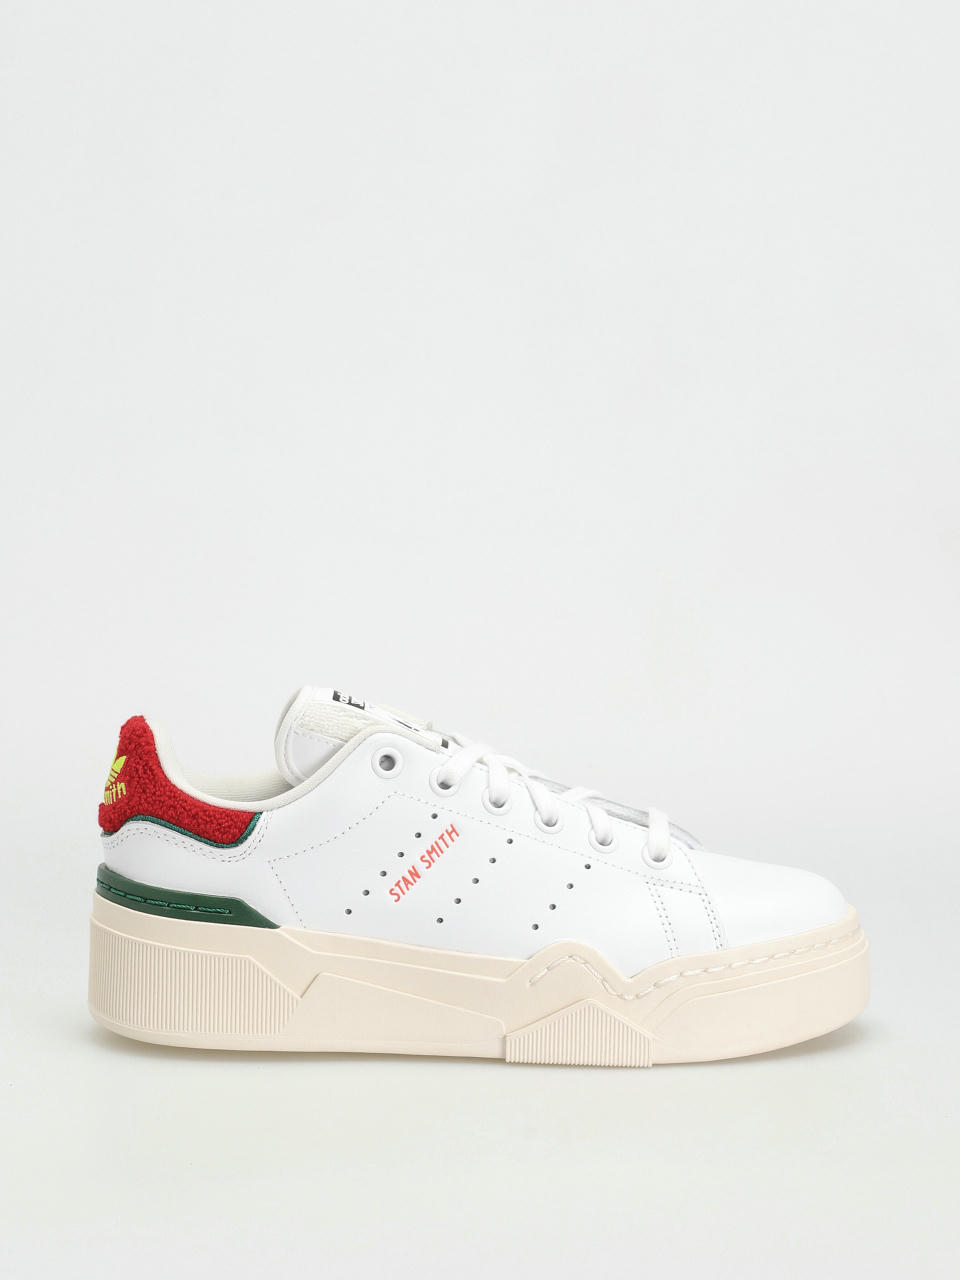 Woman with white and green Adidas Stan Smith shoes and Gucci socks